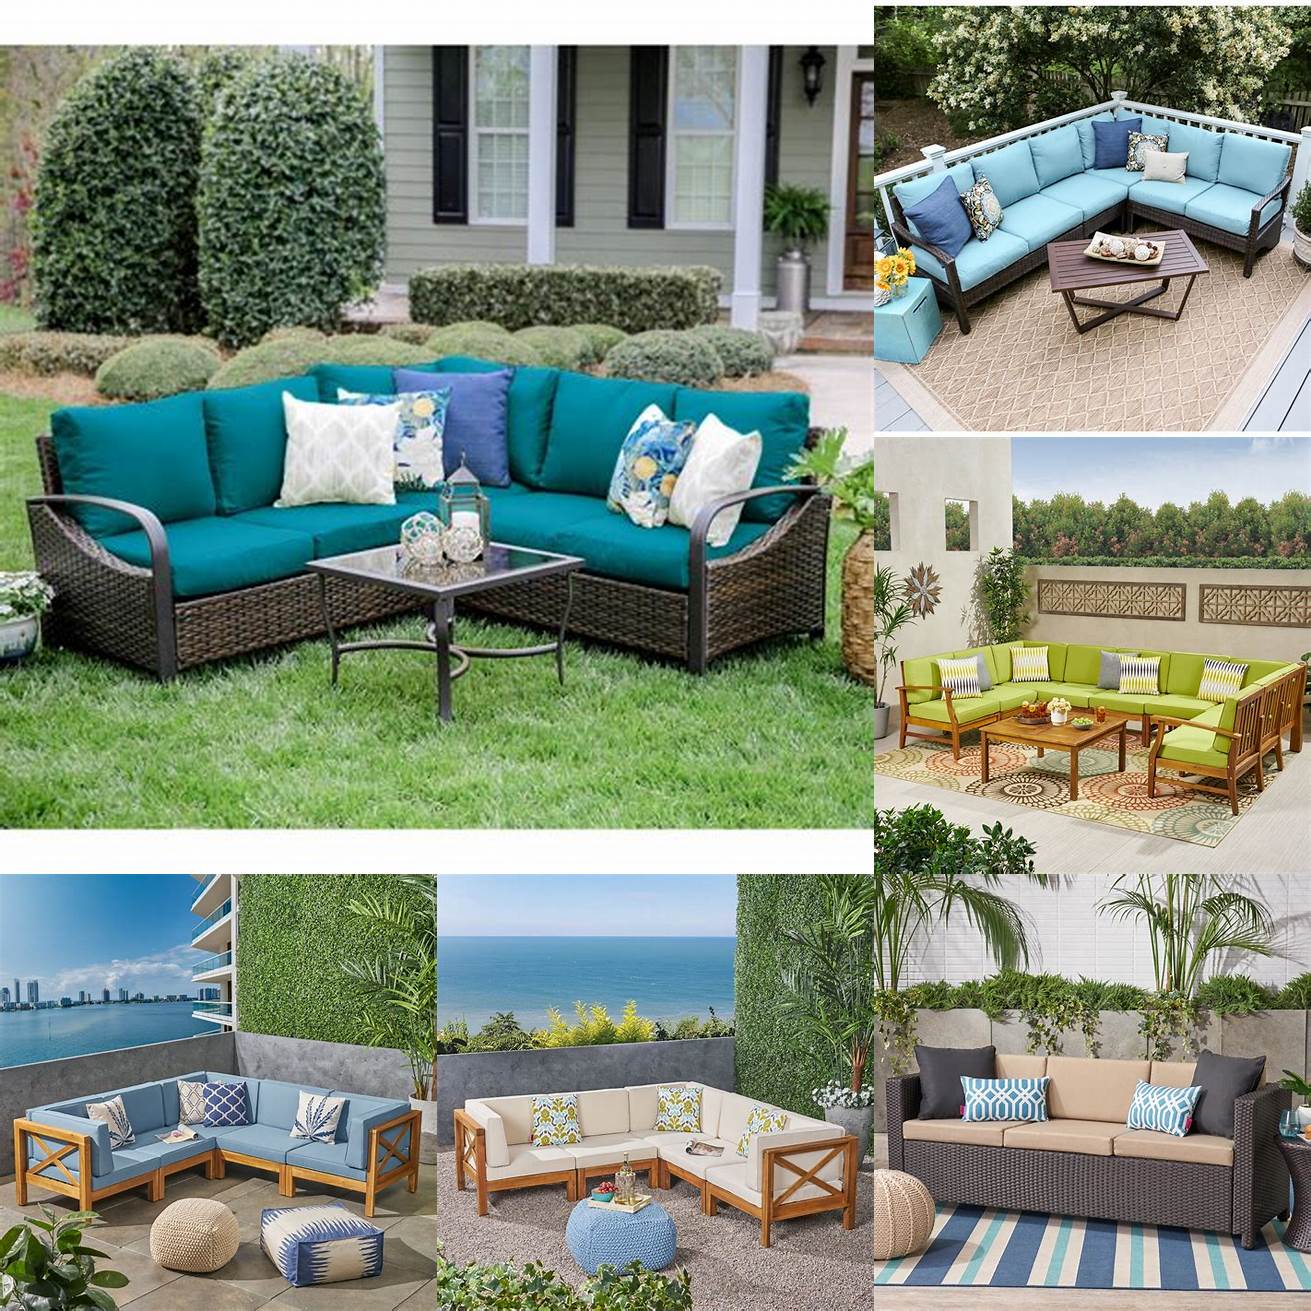 Outdoor sectional with colorful cushions